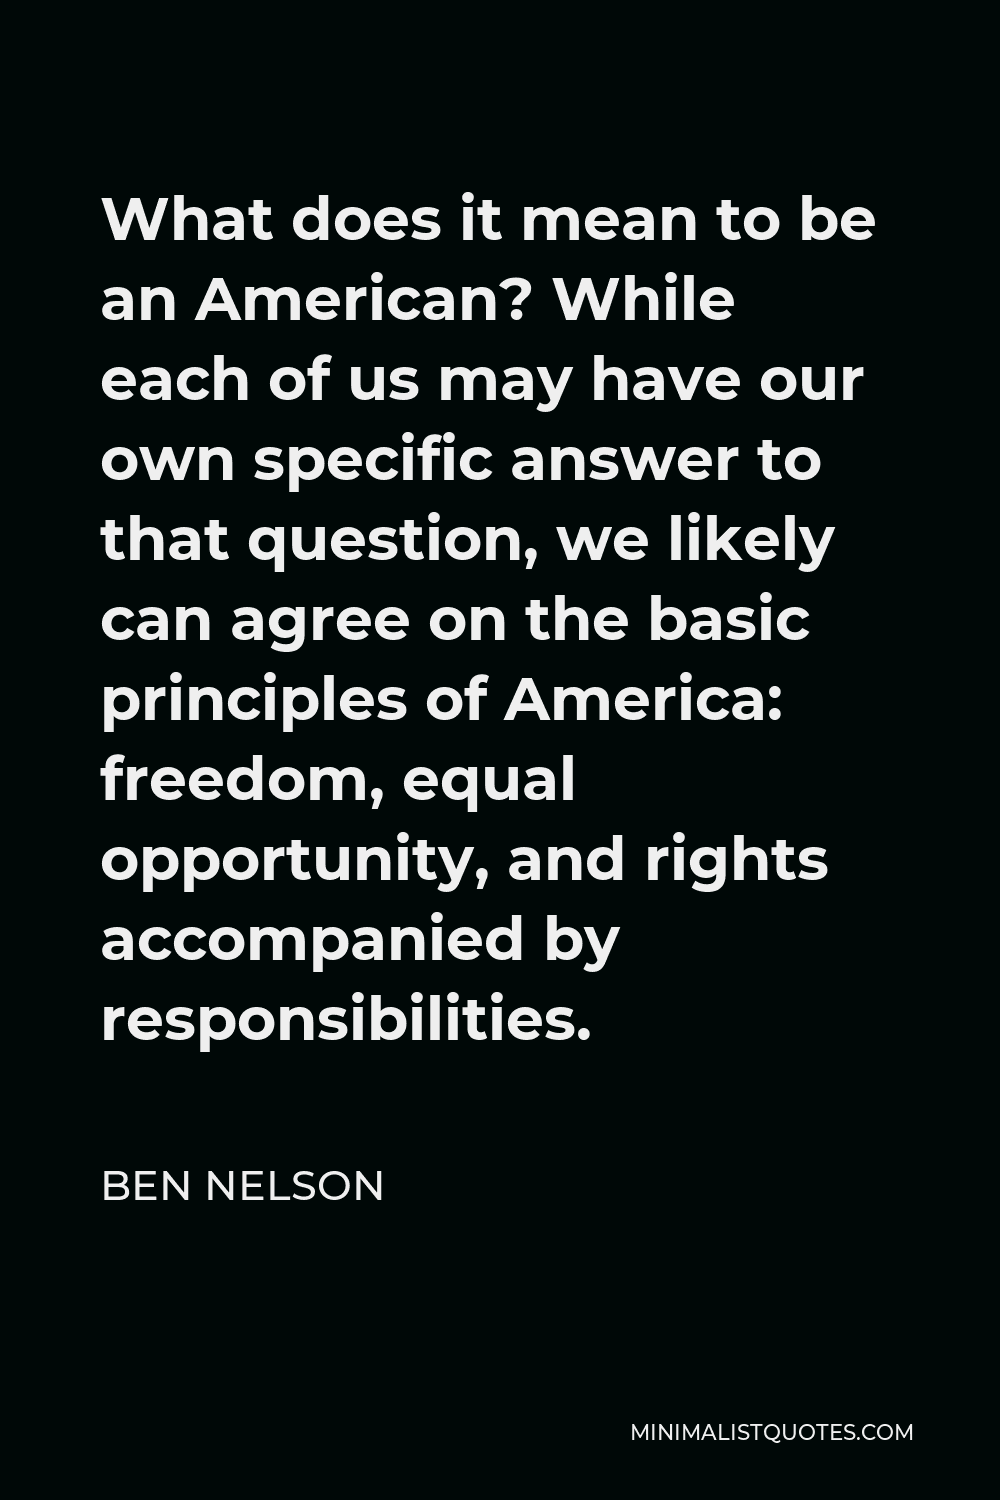 Ben Nelson Quote - What does it mean to be an American? While each of us may have our own specific answer to that question, we likely can agree on the basic principles of America: freedom, equal opportunity, and rights accompanied by responsibilities.